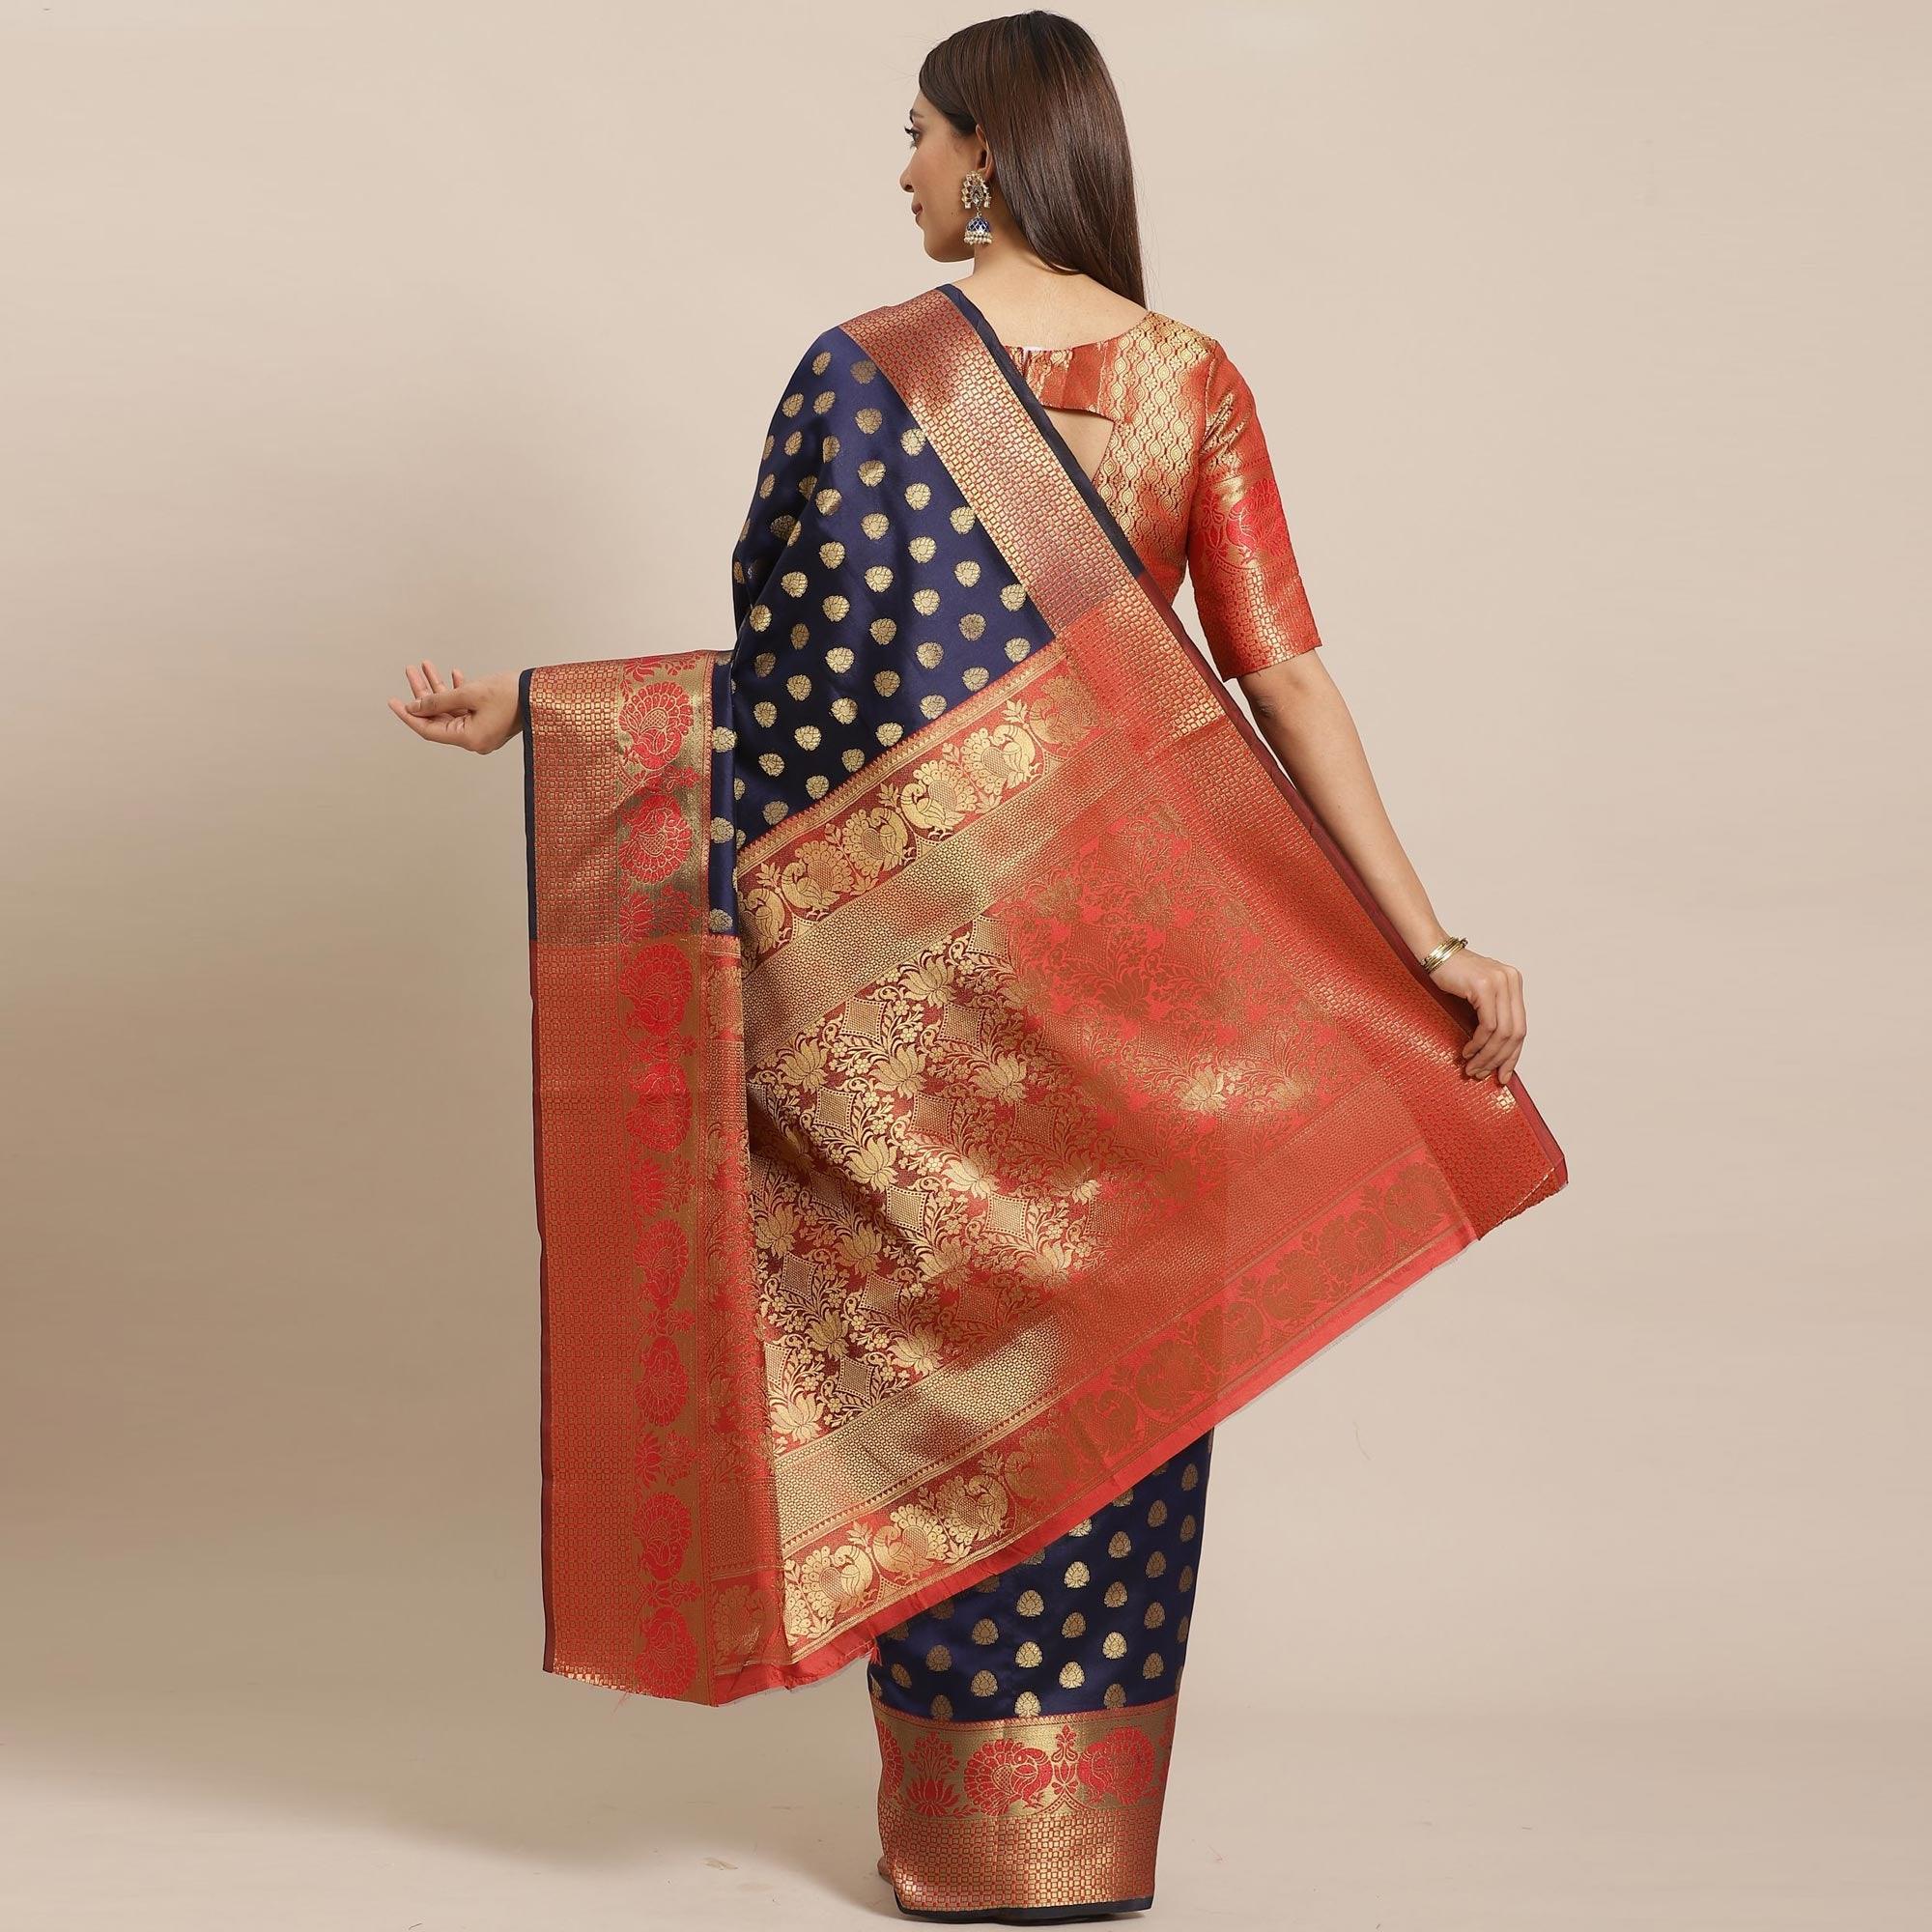 Entrancing Navy Blue - Red Colored Festive Wear Woven Silk Blend Saree - Peachmode